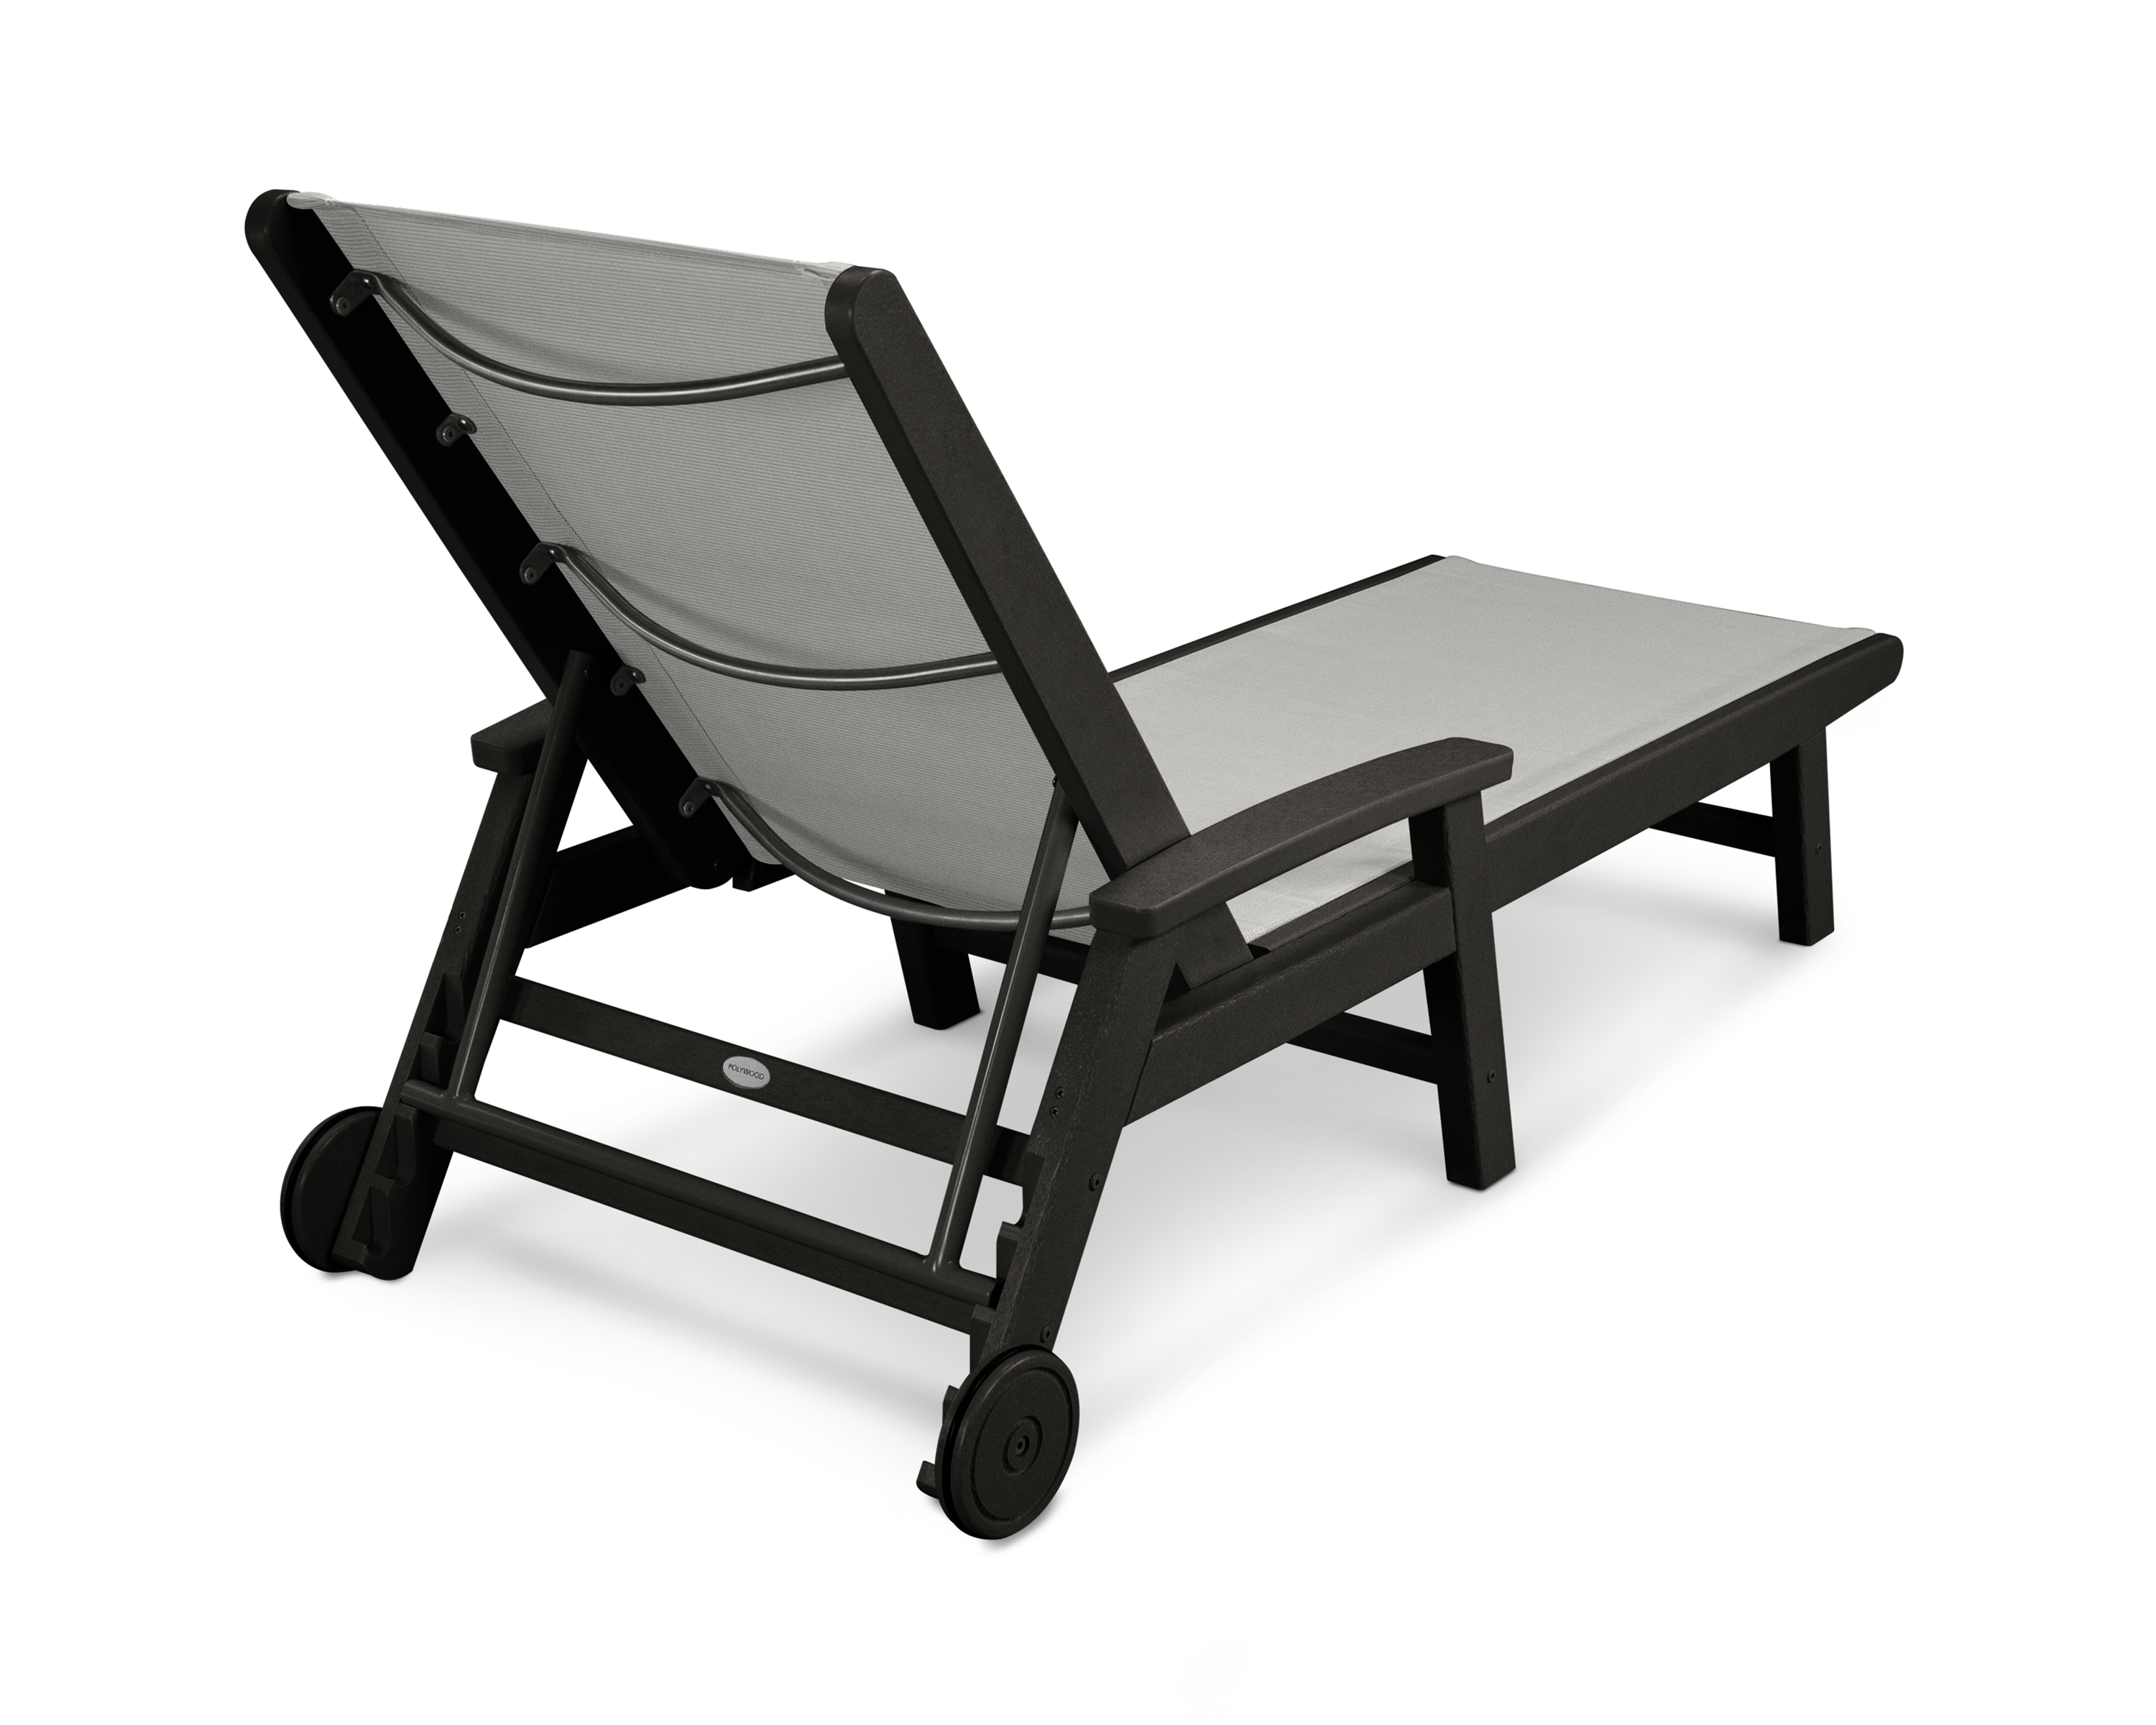 coastal chaise with wheels in black / metallic sling product image